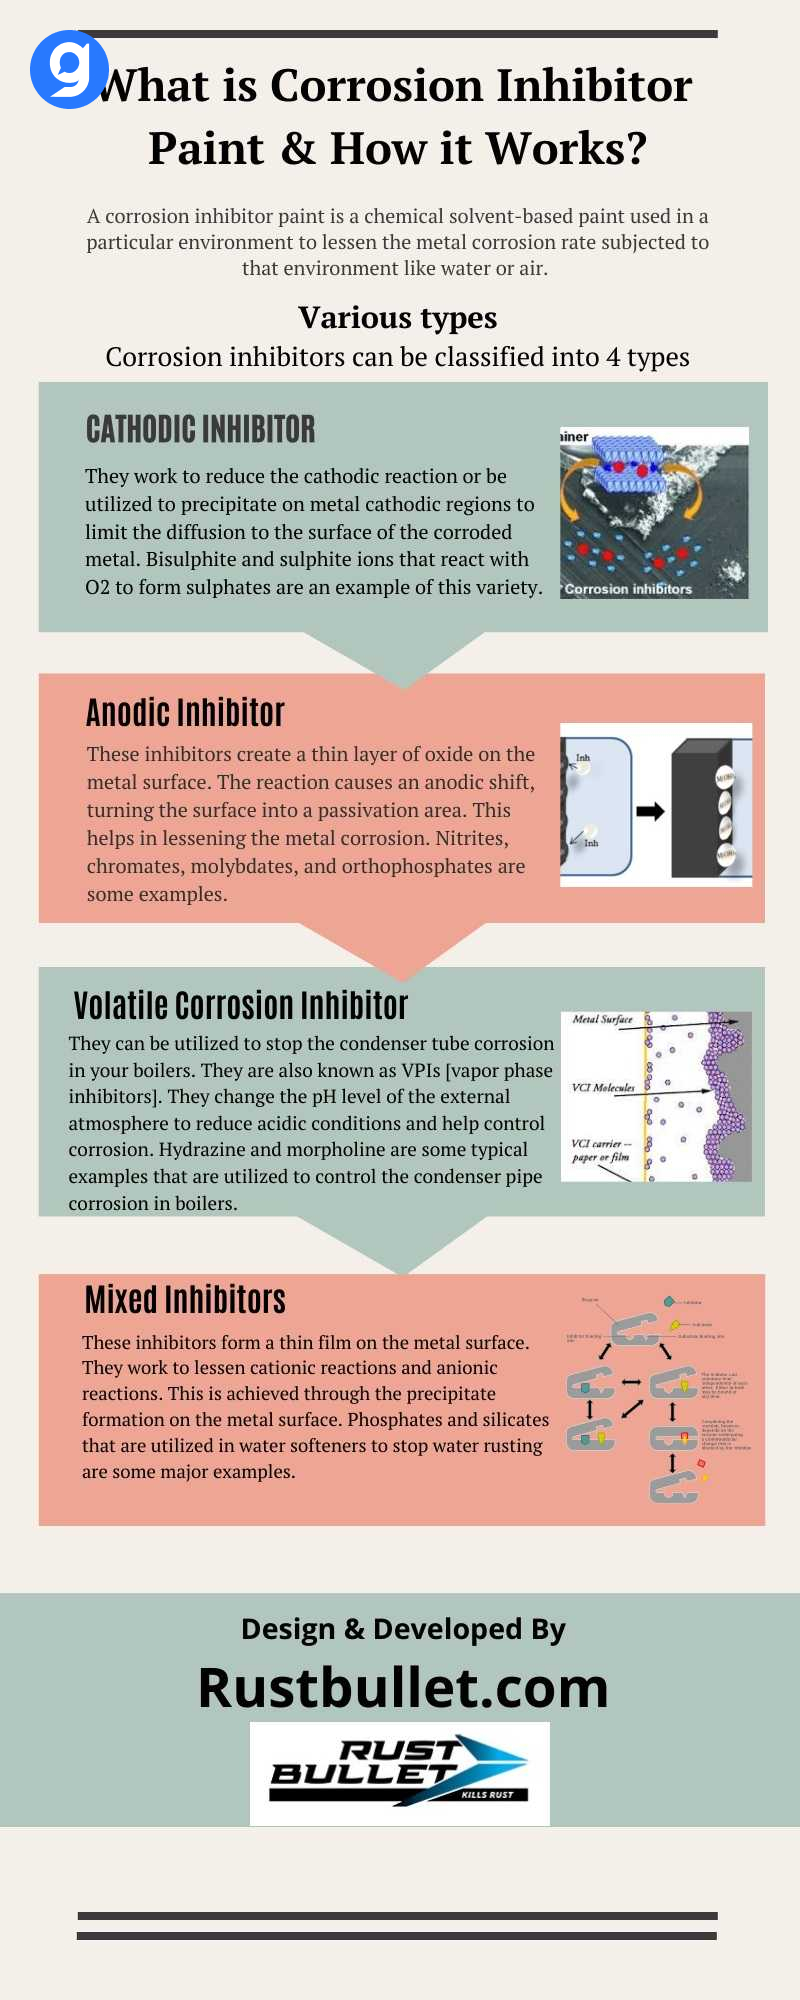 What is corrosion inhibitor paint & how it works